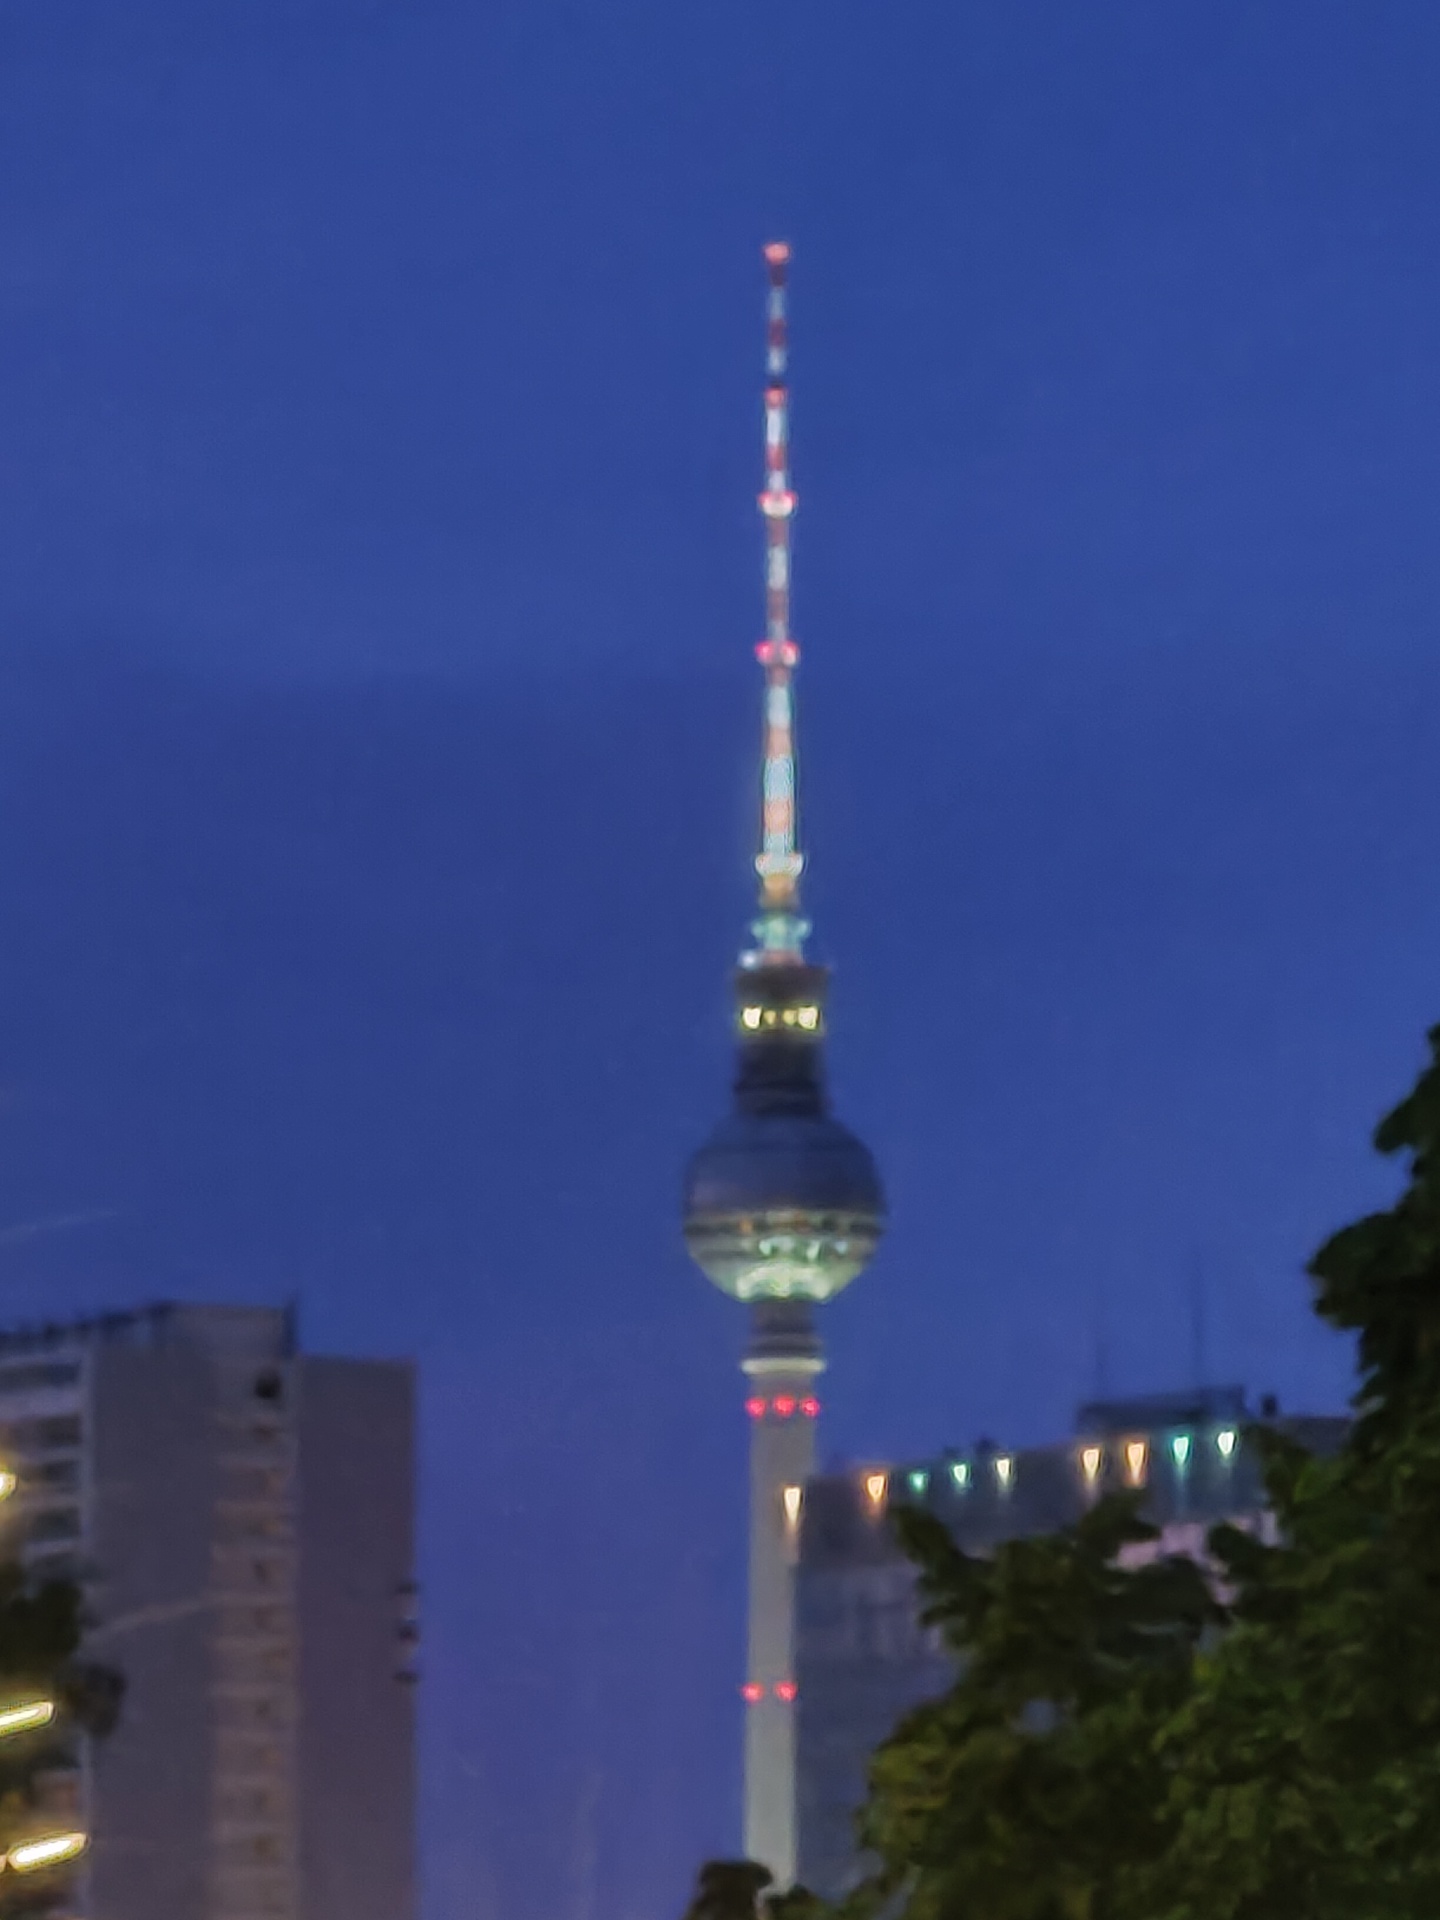 Realme X3 Superzoom TV Tower 10x night mode low light